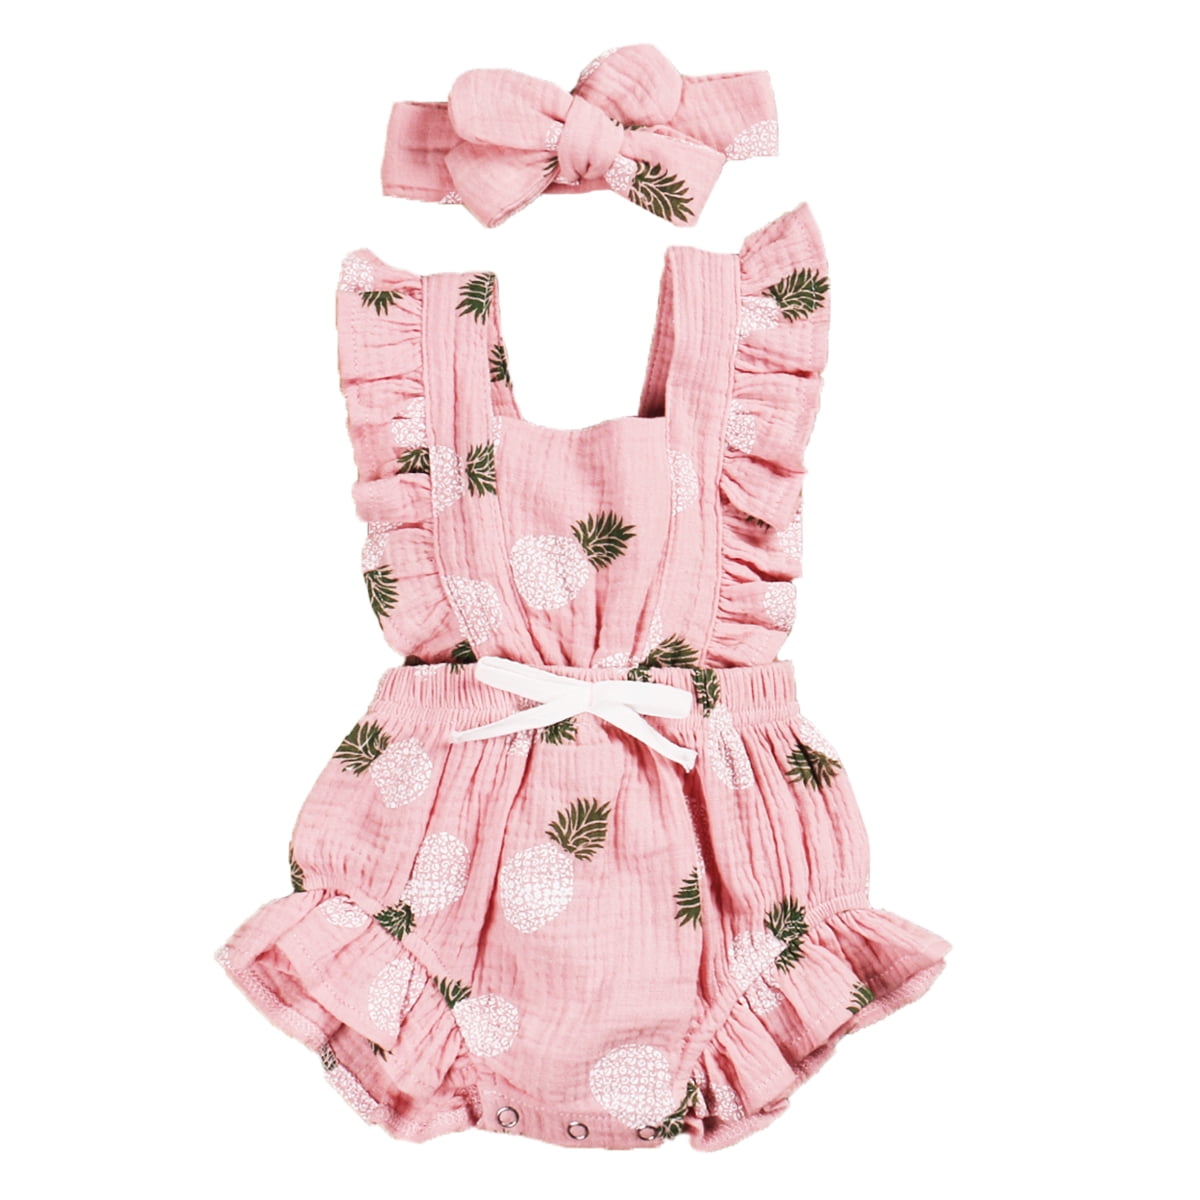 No shoes! Details about   2-piece Solid Bodysuit & Headband for Baby Girl